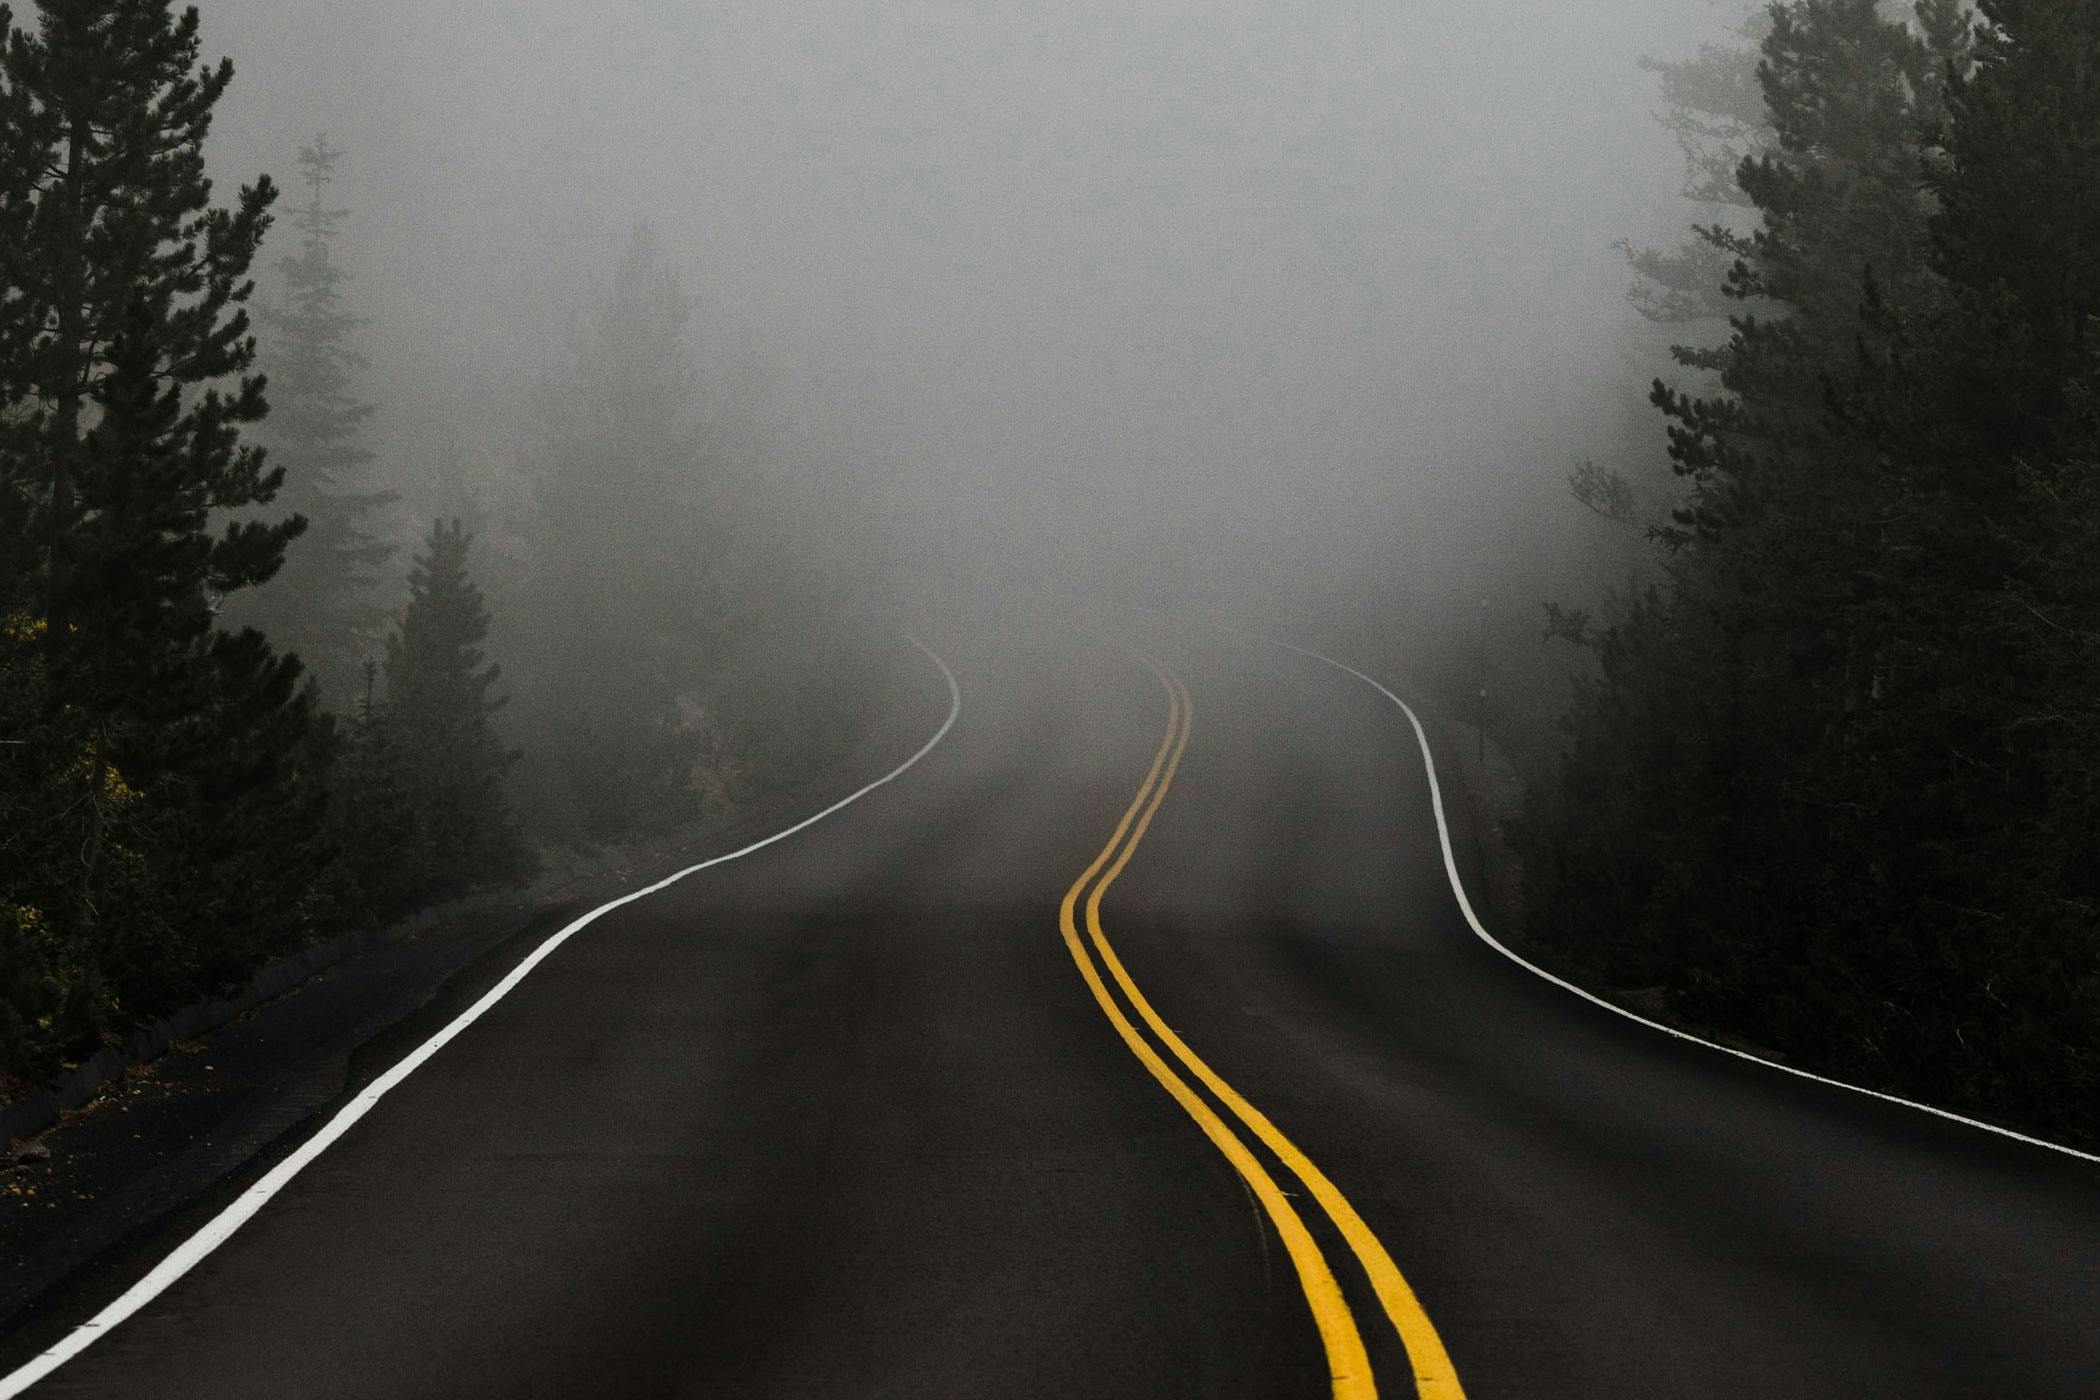 A 2-lane road leading into a foggy mist